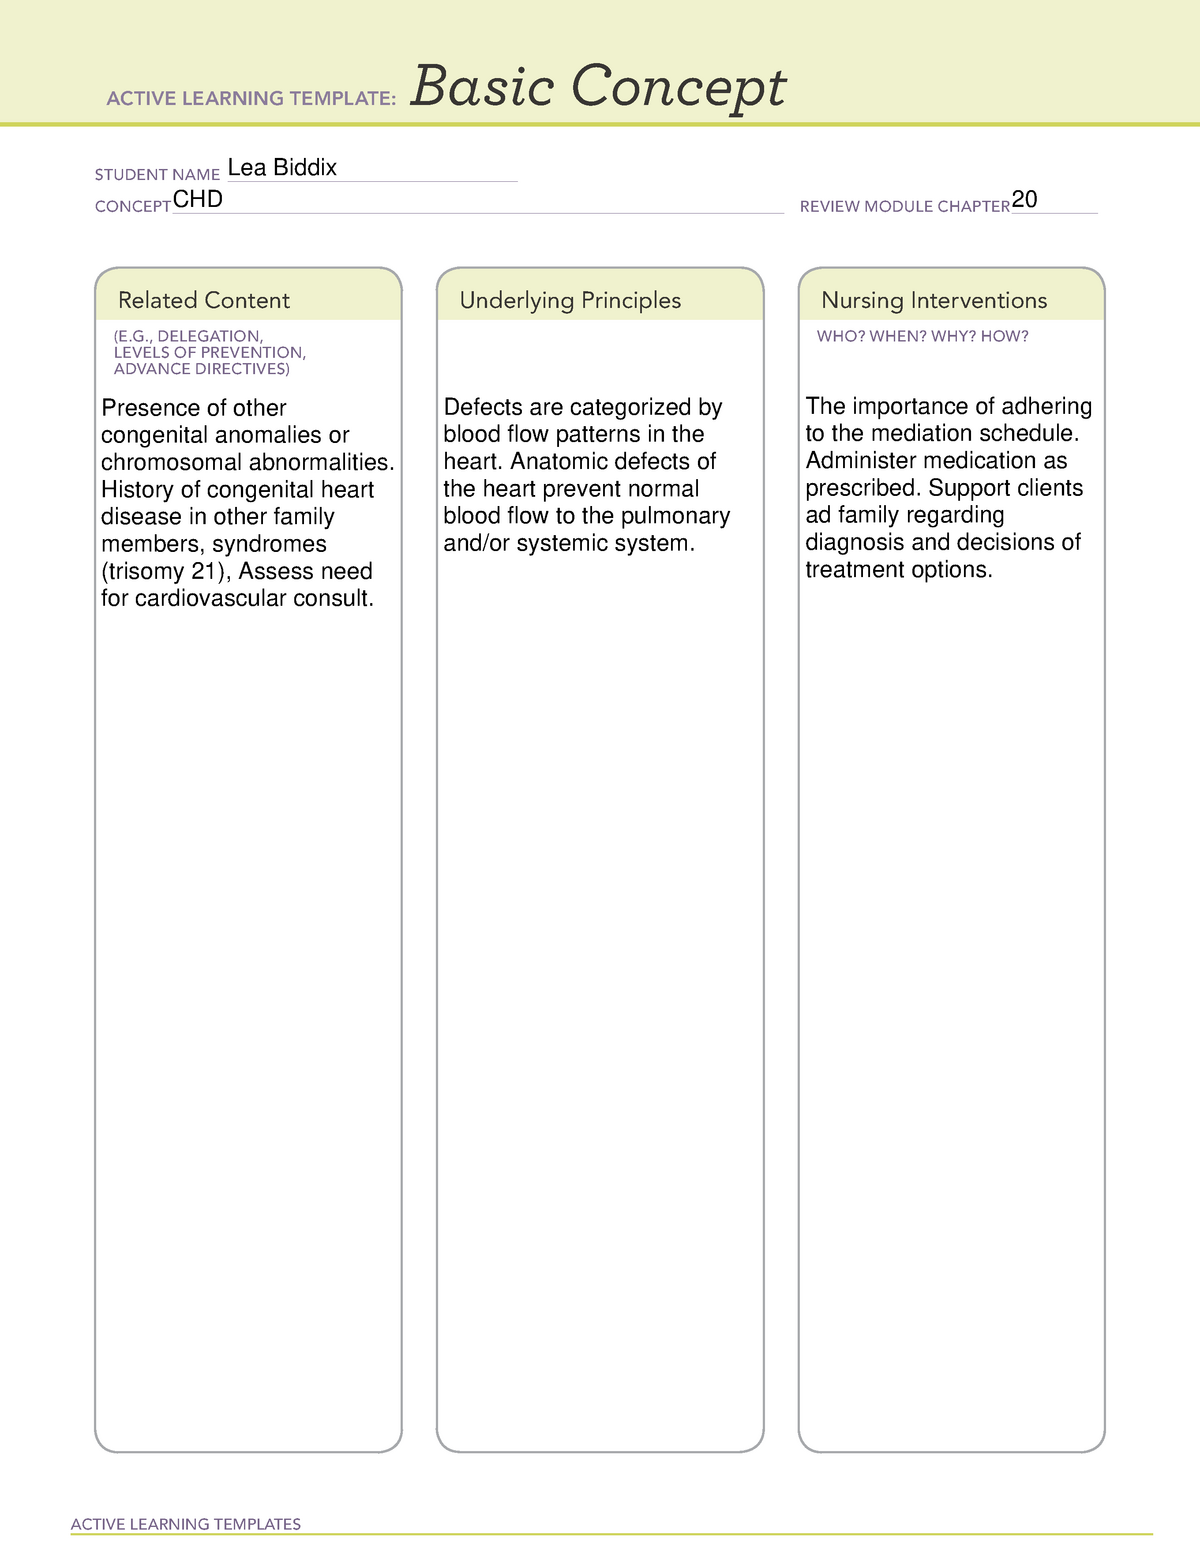 Basic Concept ATI work ACTIVE LEARNING TEMPLATES Basic Concept